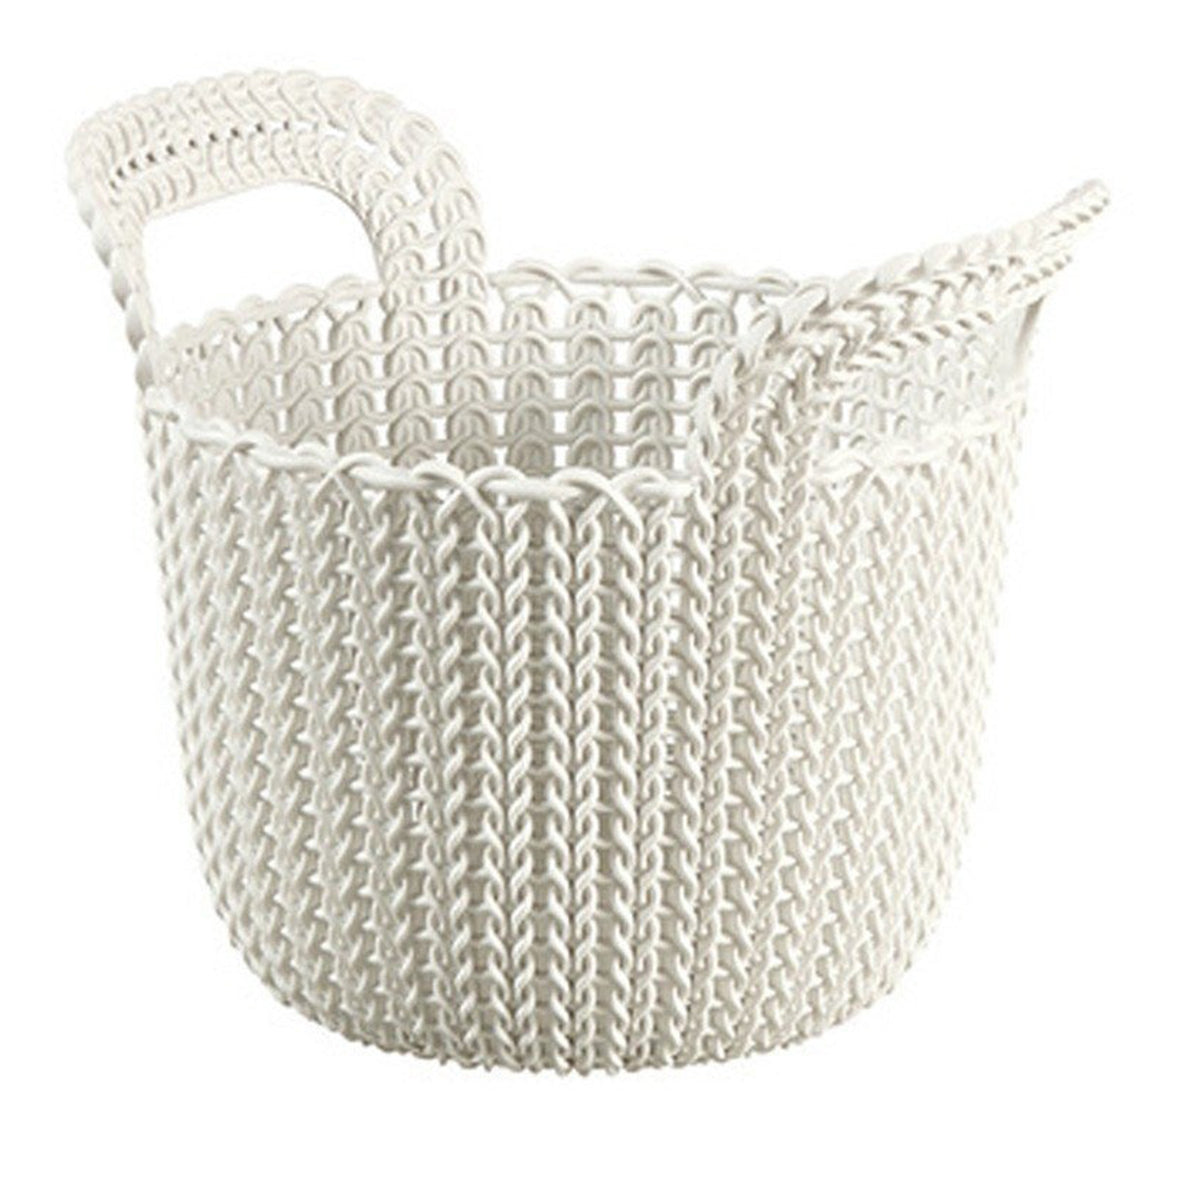 Multi-Use Basket with handle - White